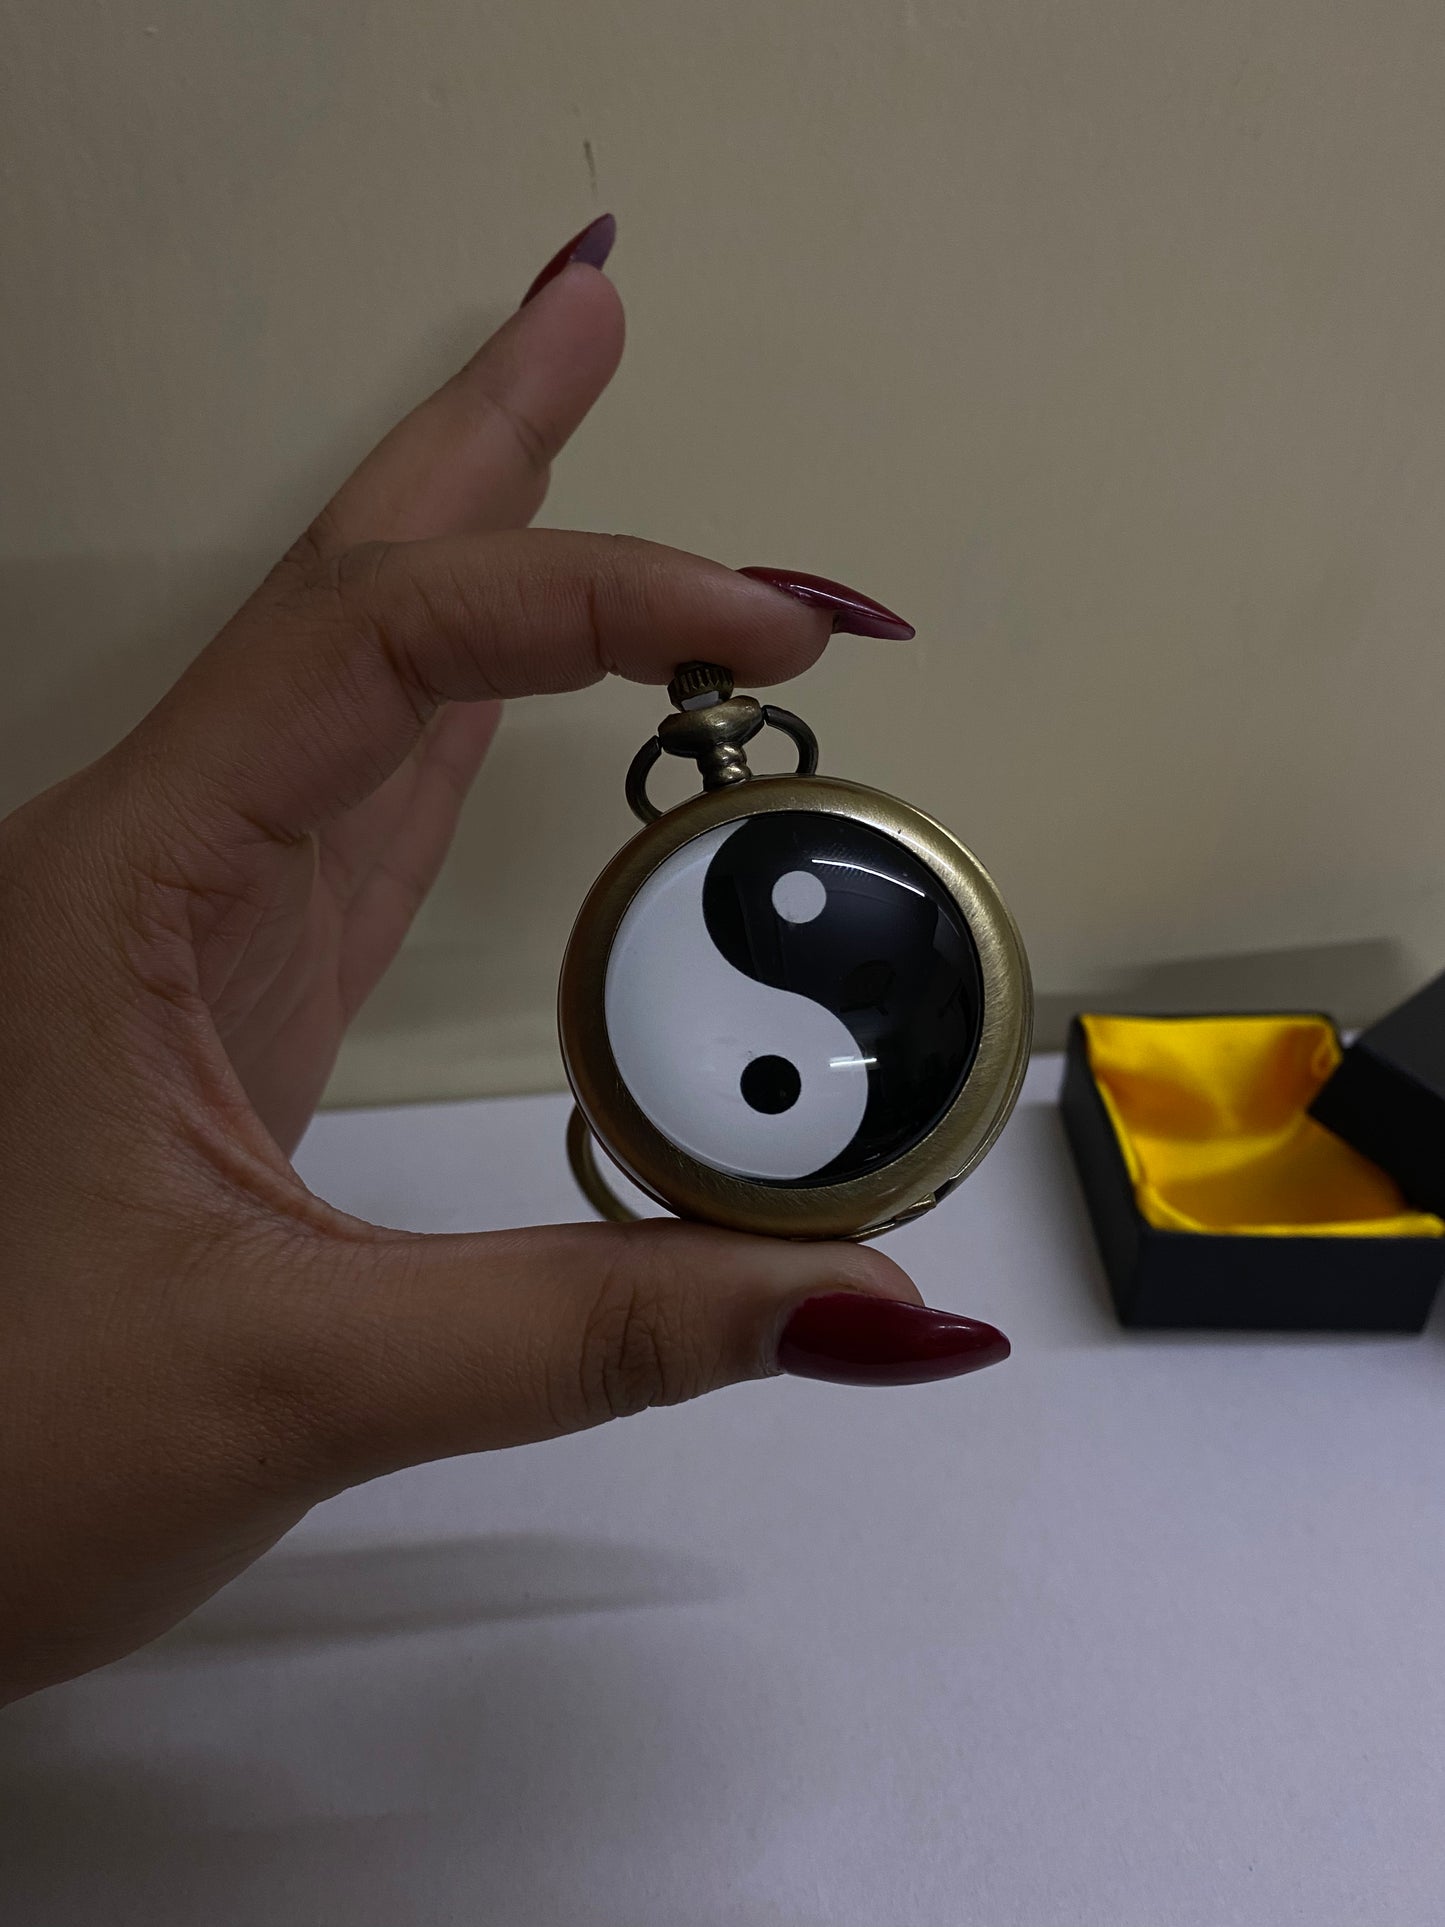 Yinyang antique watch keychain